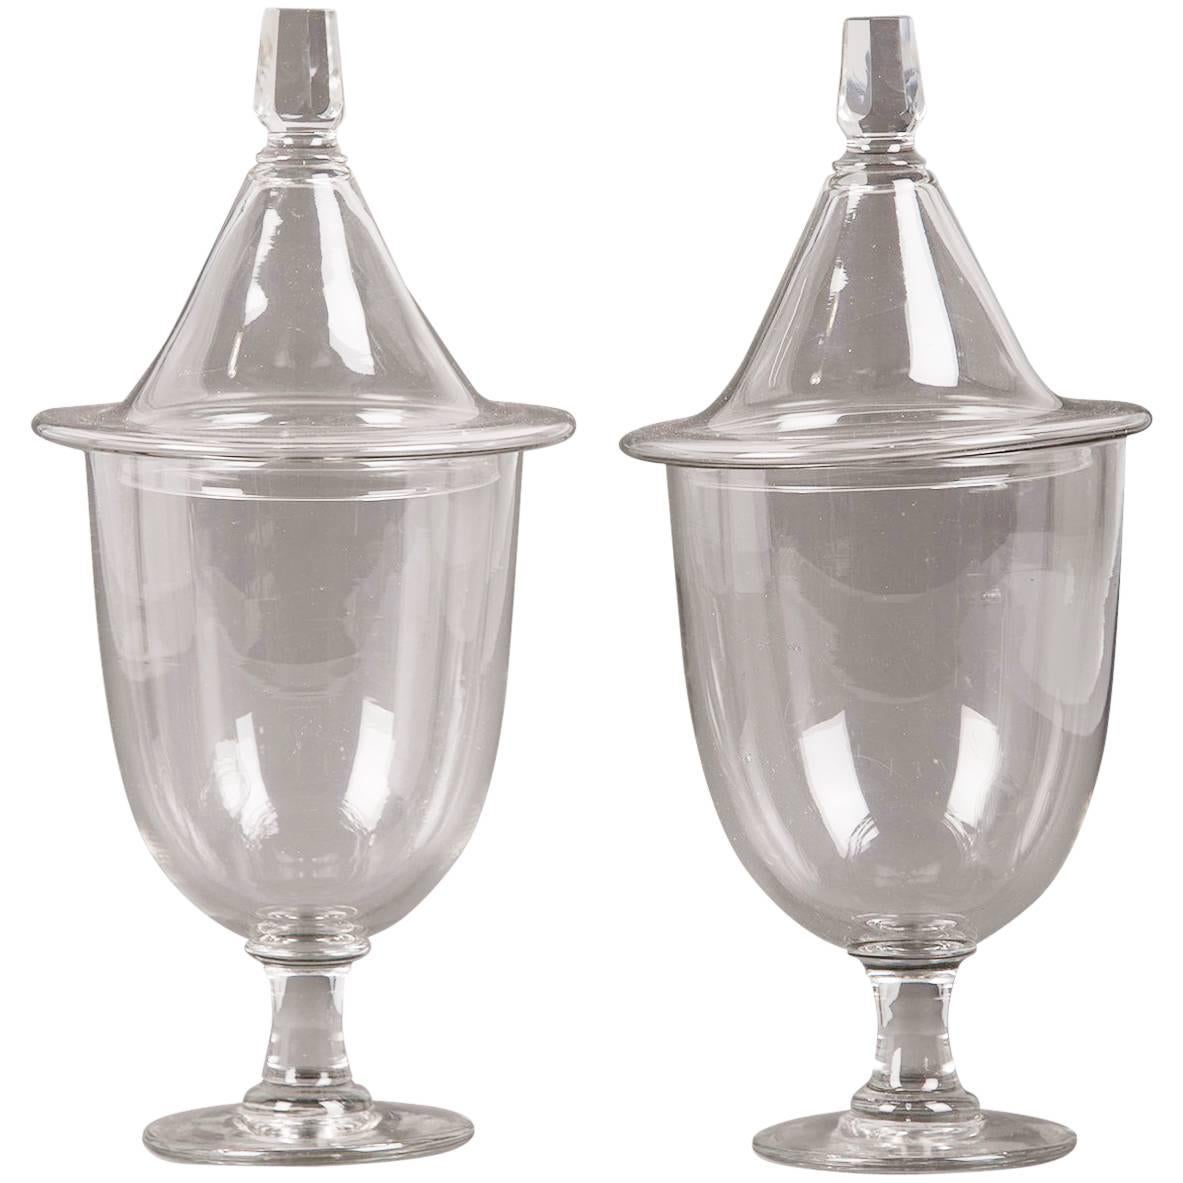 Pair of Antique English Regency Style Glass Urns with Lids, circa 1875